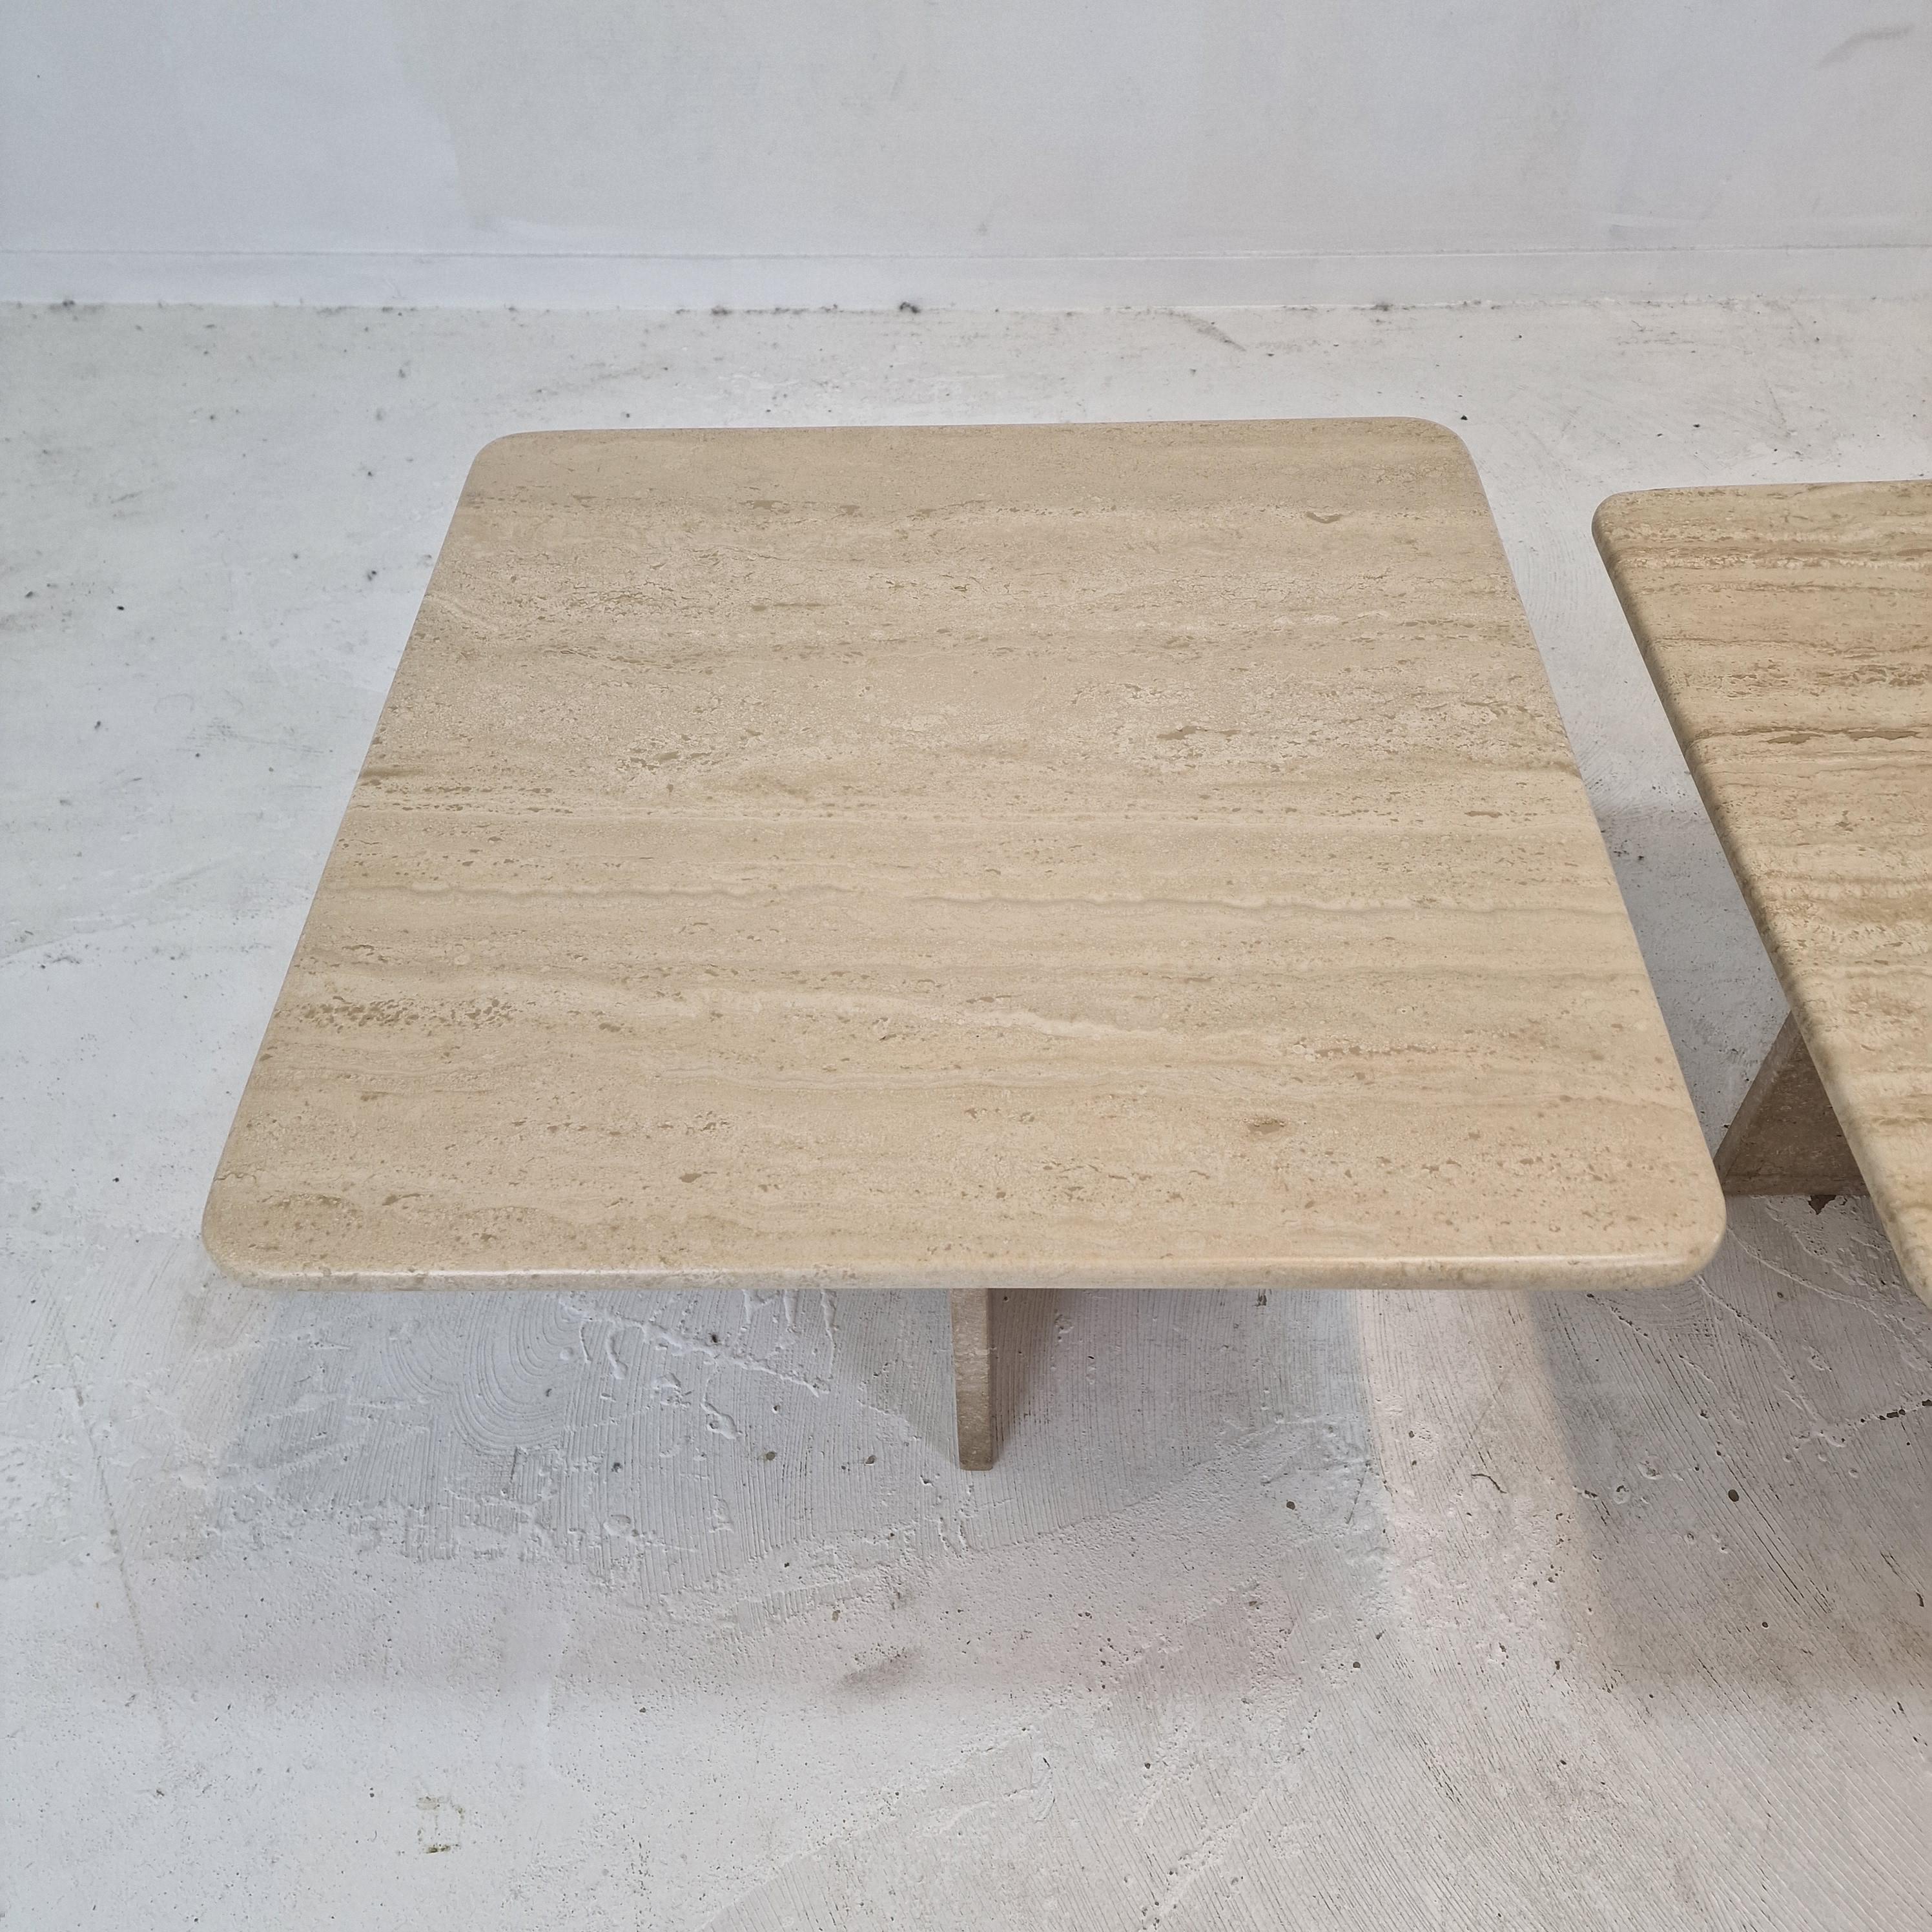 Set of 3 Italian Travertine Coffee or Side Tables, 1990s For Sale 4